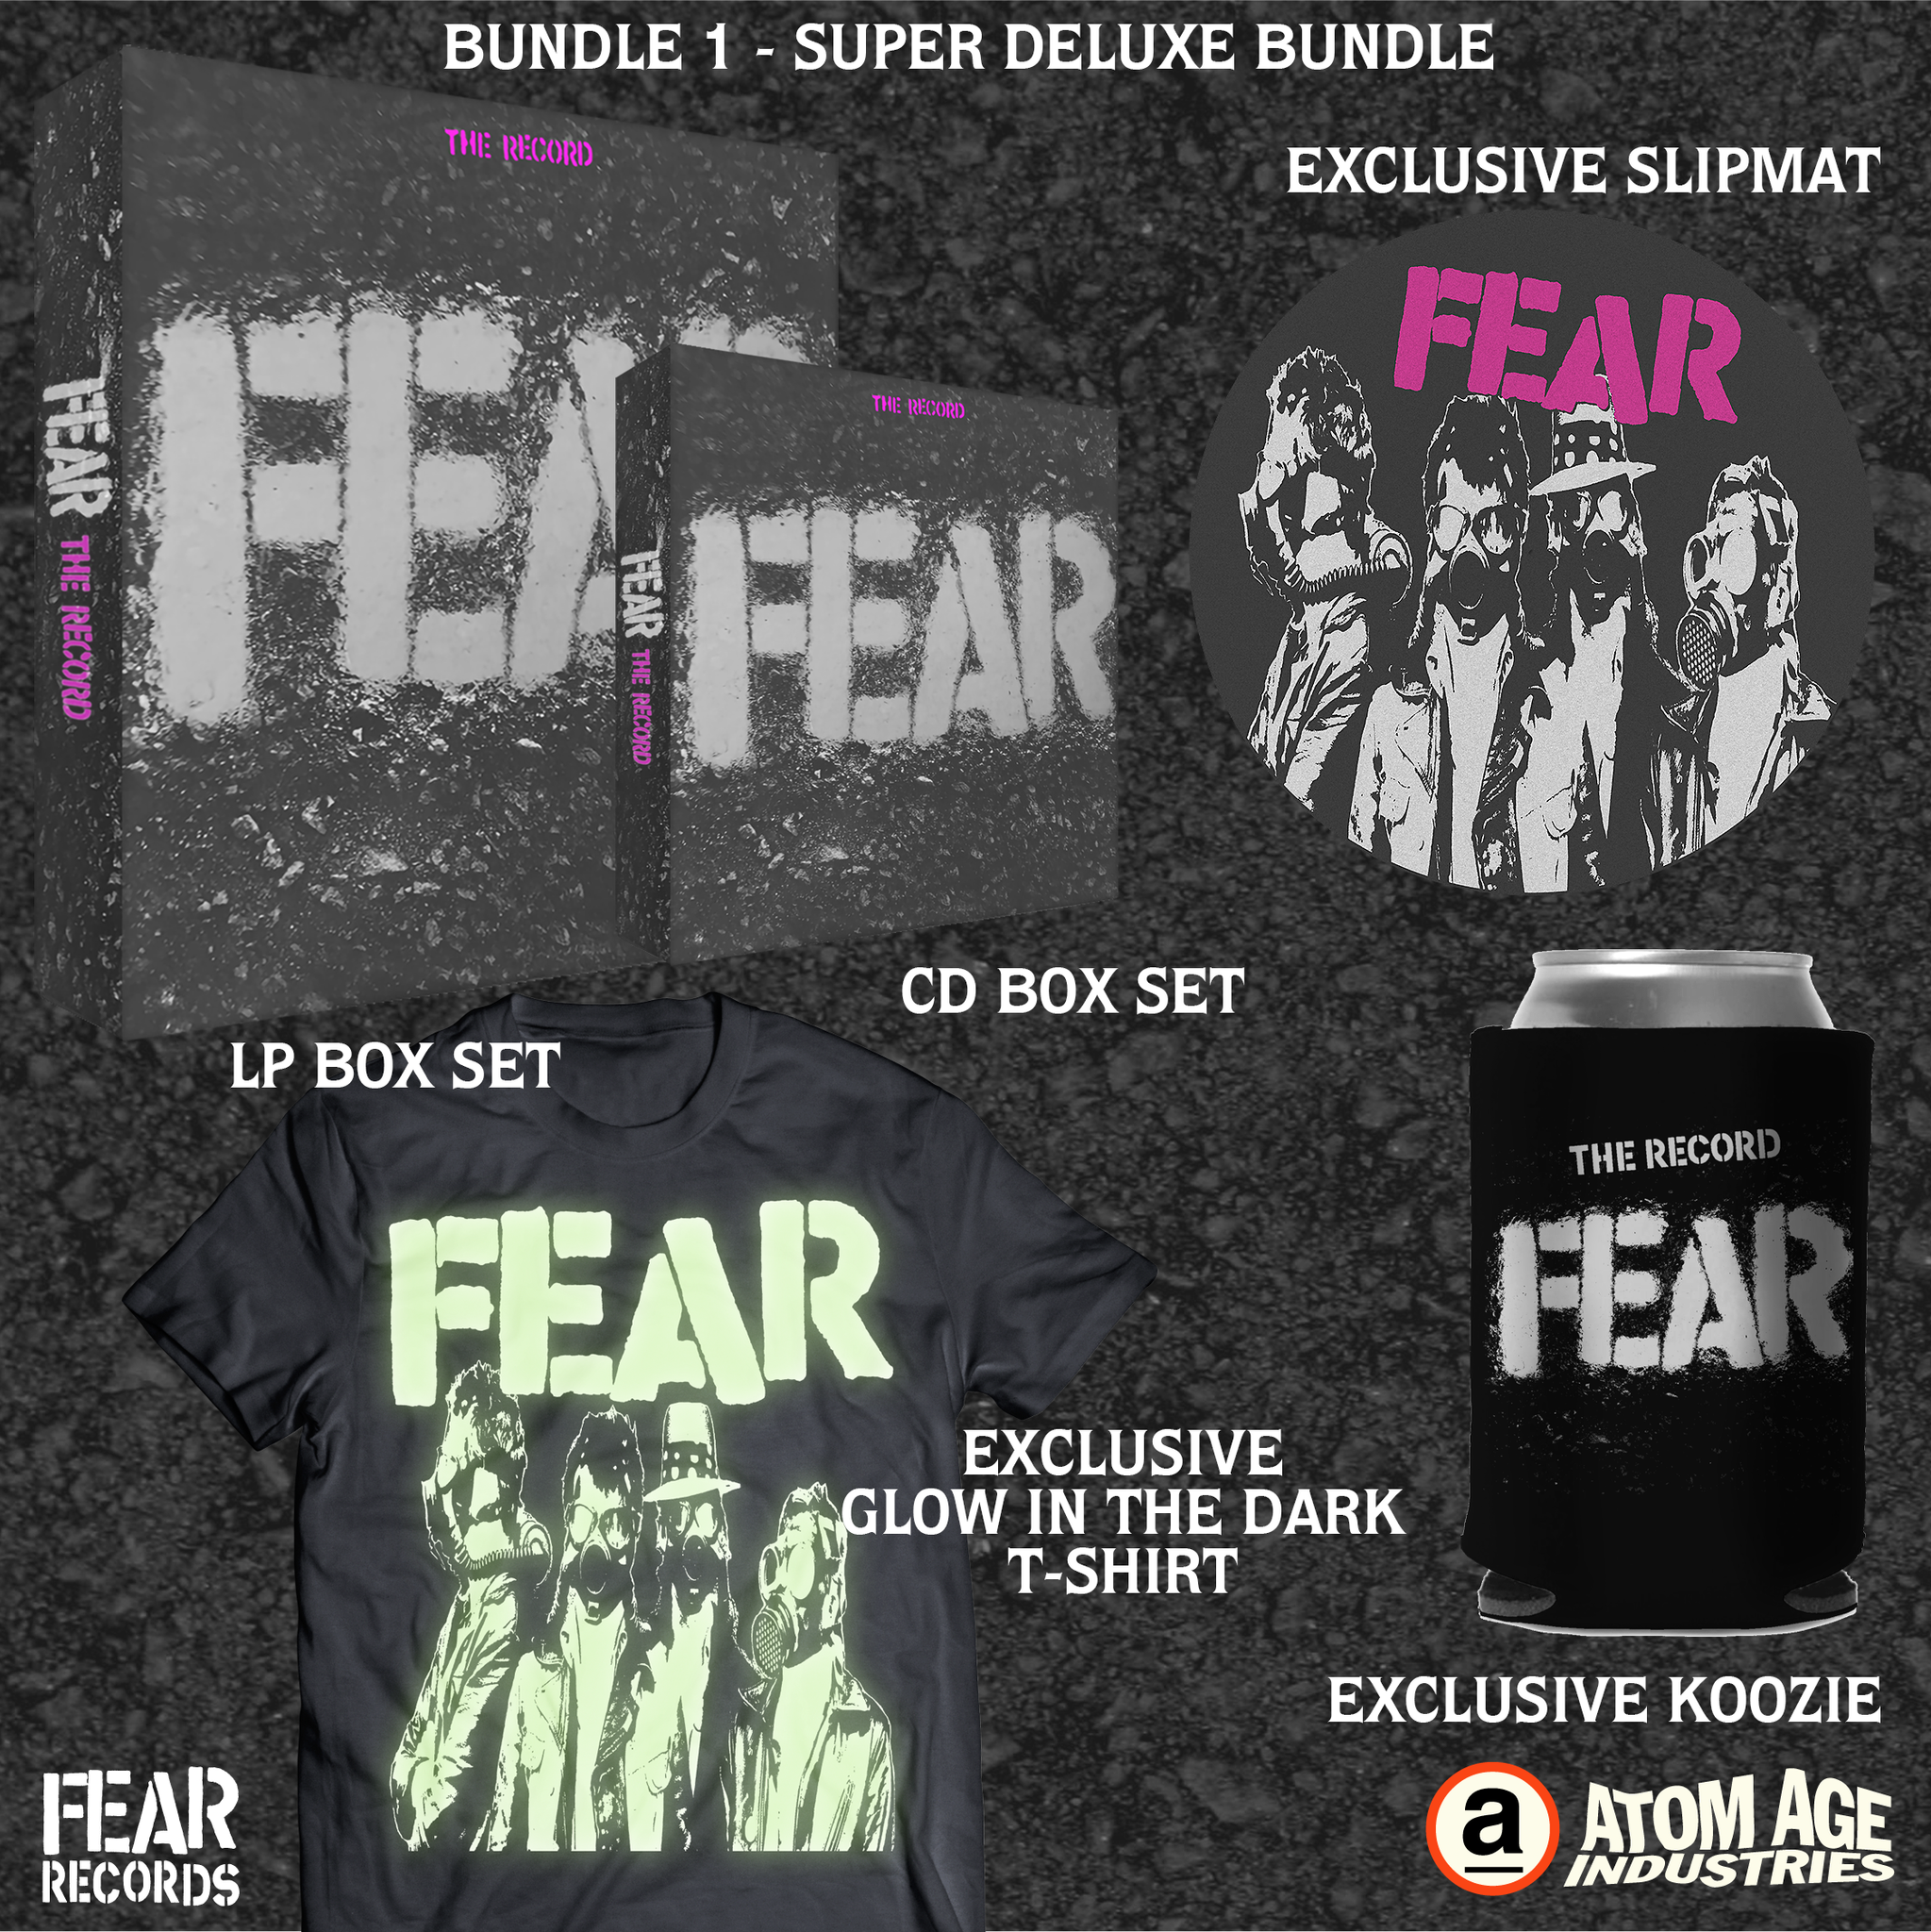 FEAR:  "FEAR THE RECORD" LIMITED EDITION 5LP BOX SET SUPER DELUXE BUNDLE 1  ***PREORDER- ORDERS CLOSED***